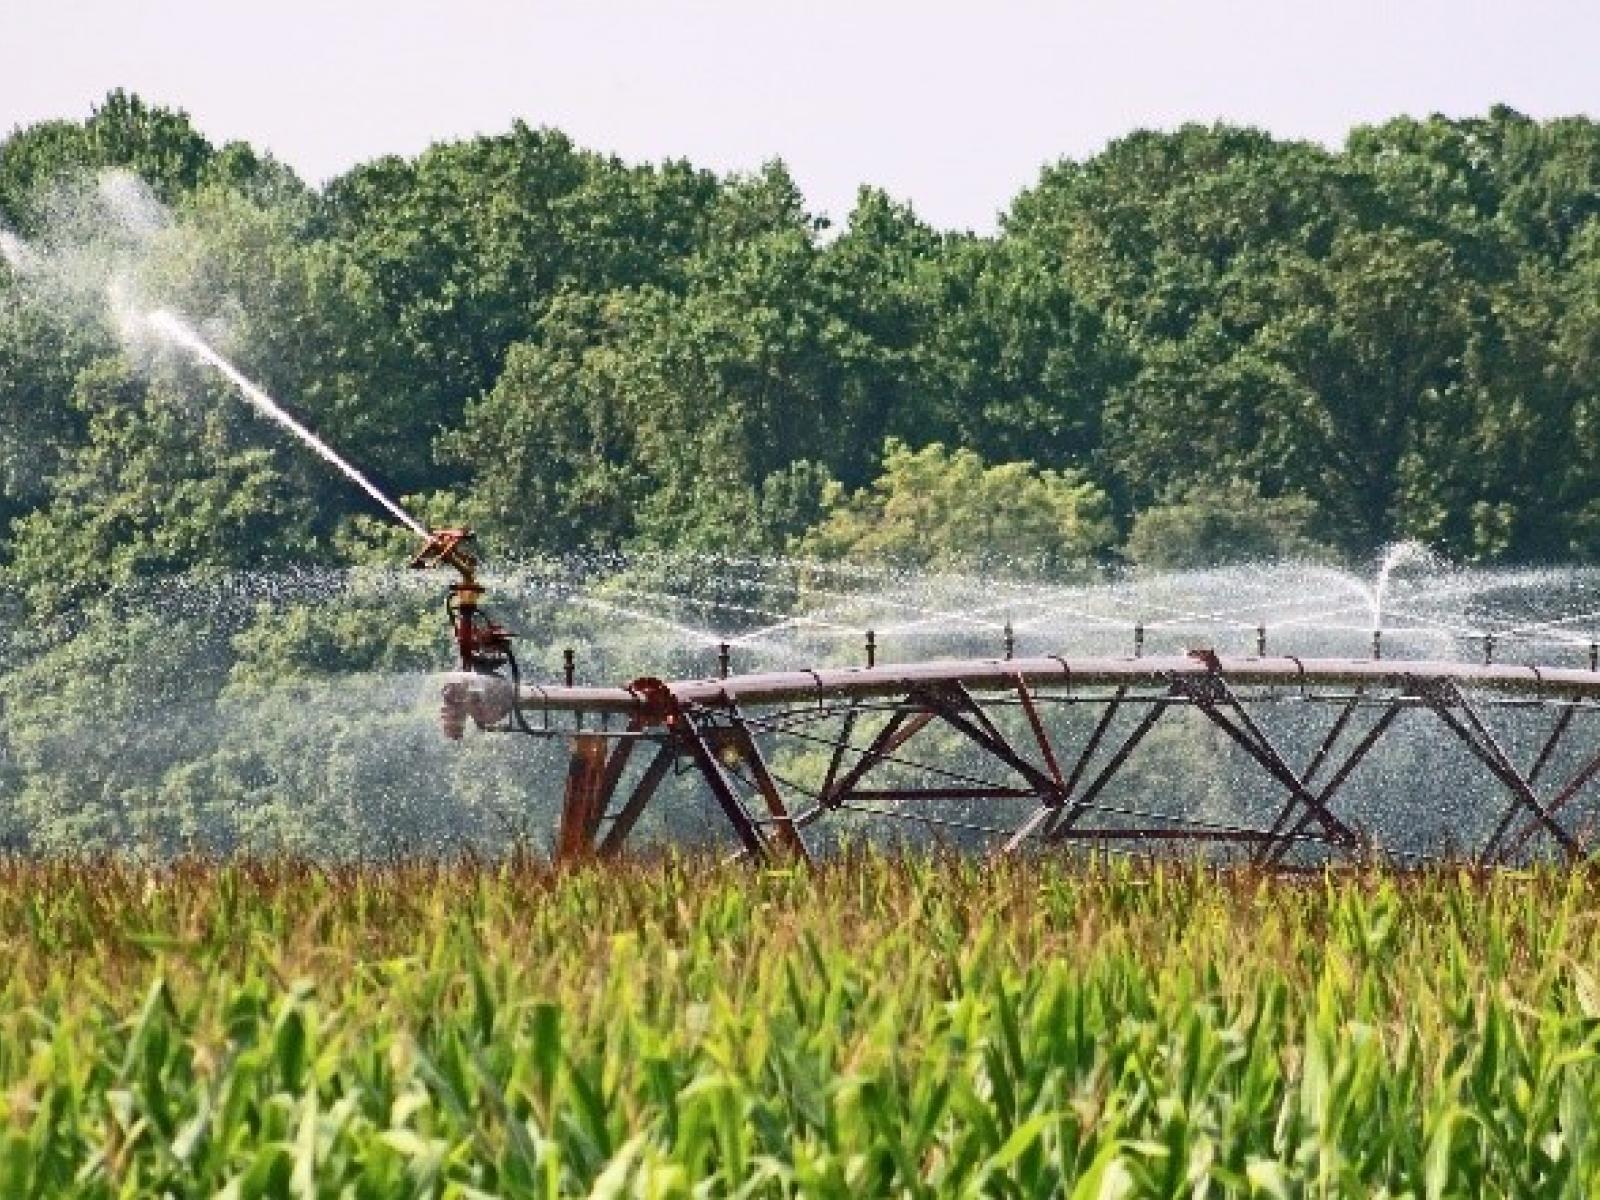 Large commercial sprinkler system above growing corn in a field